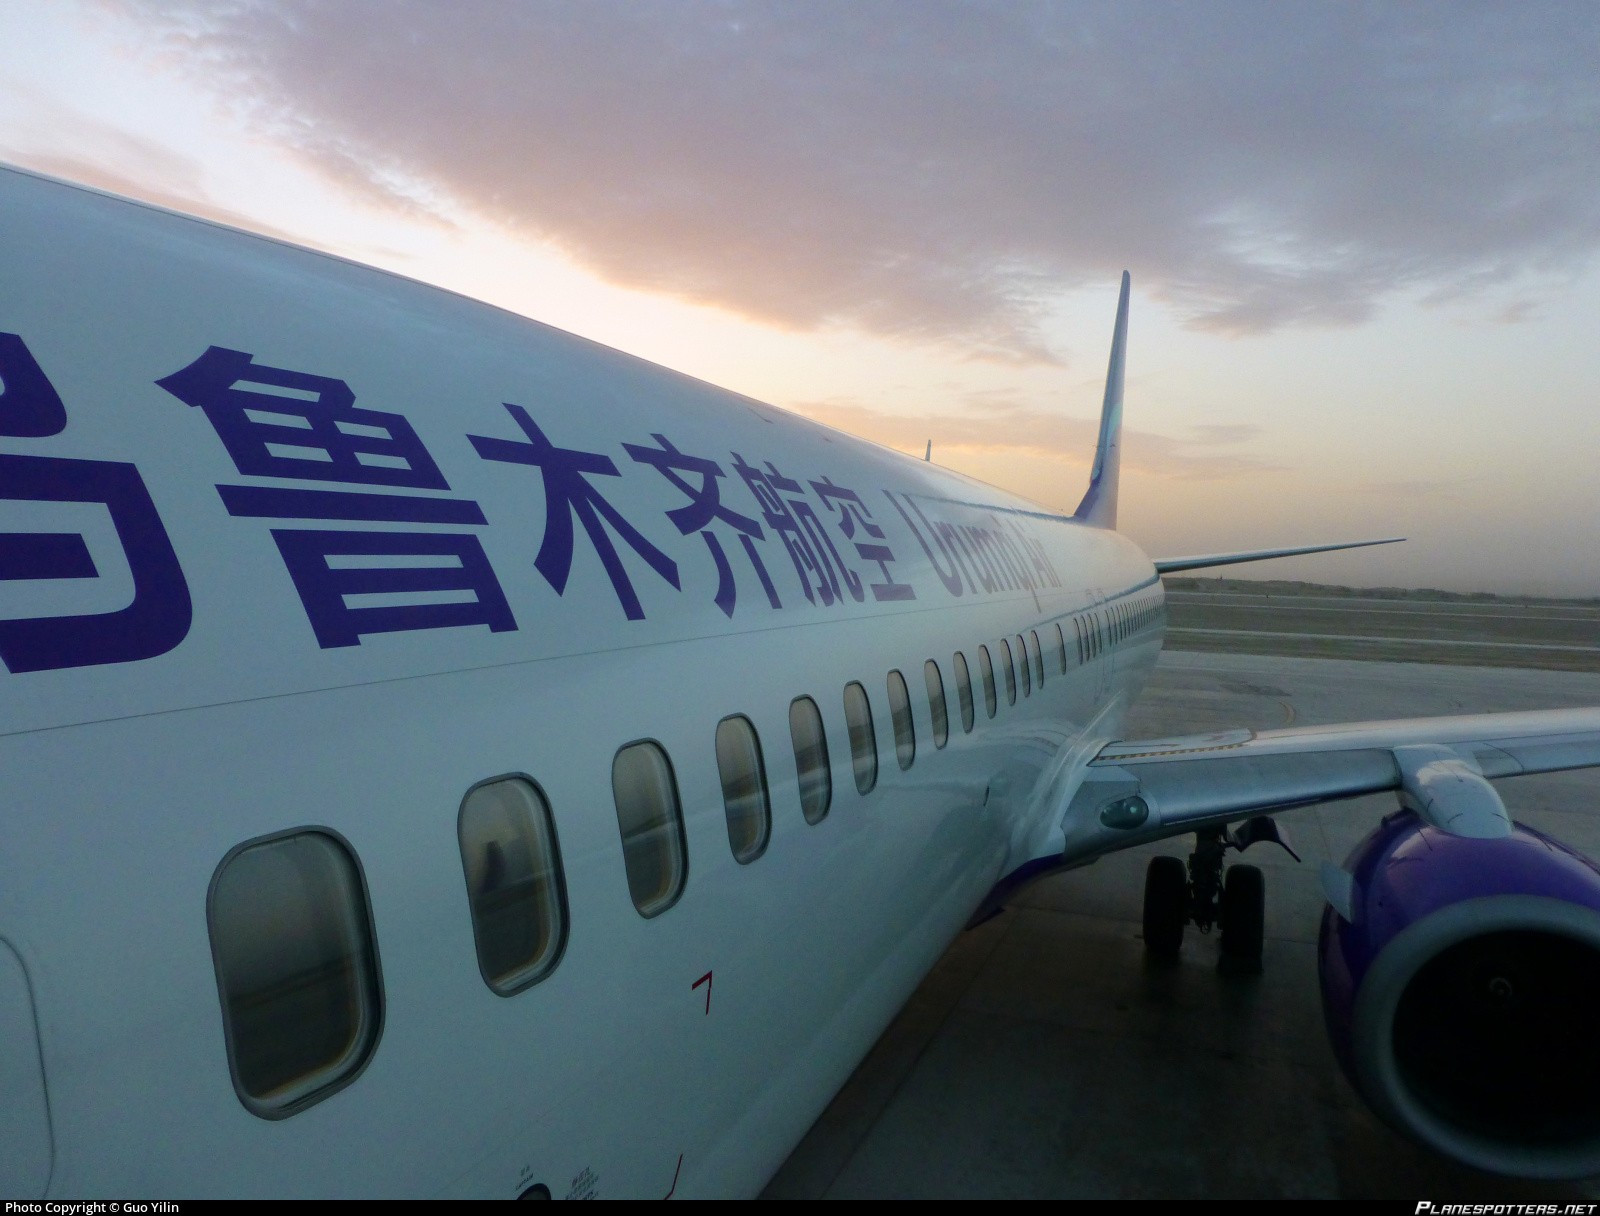 Urumqi Air now says the stewardess filmed the footage and posted it on social media.